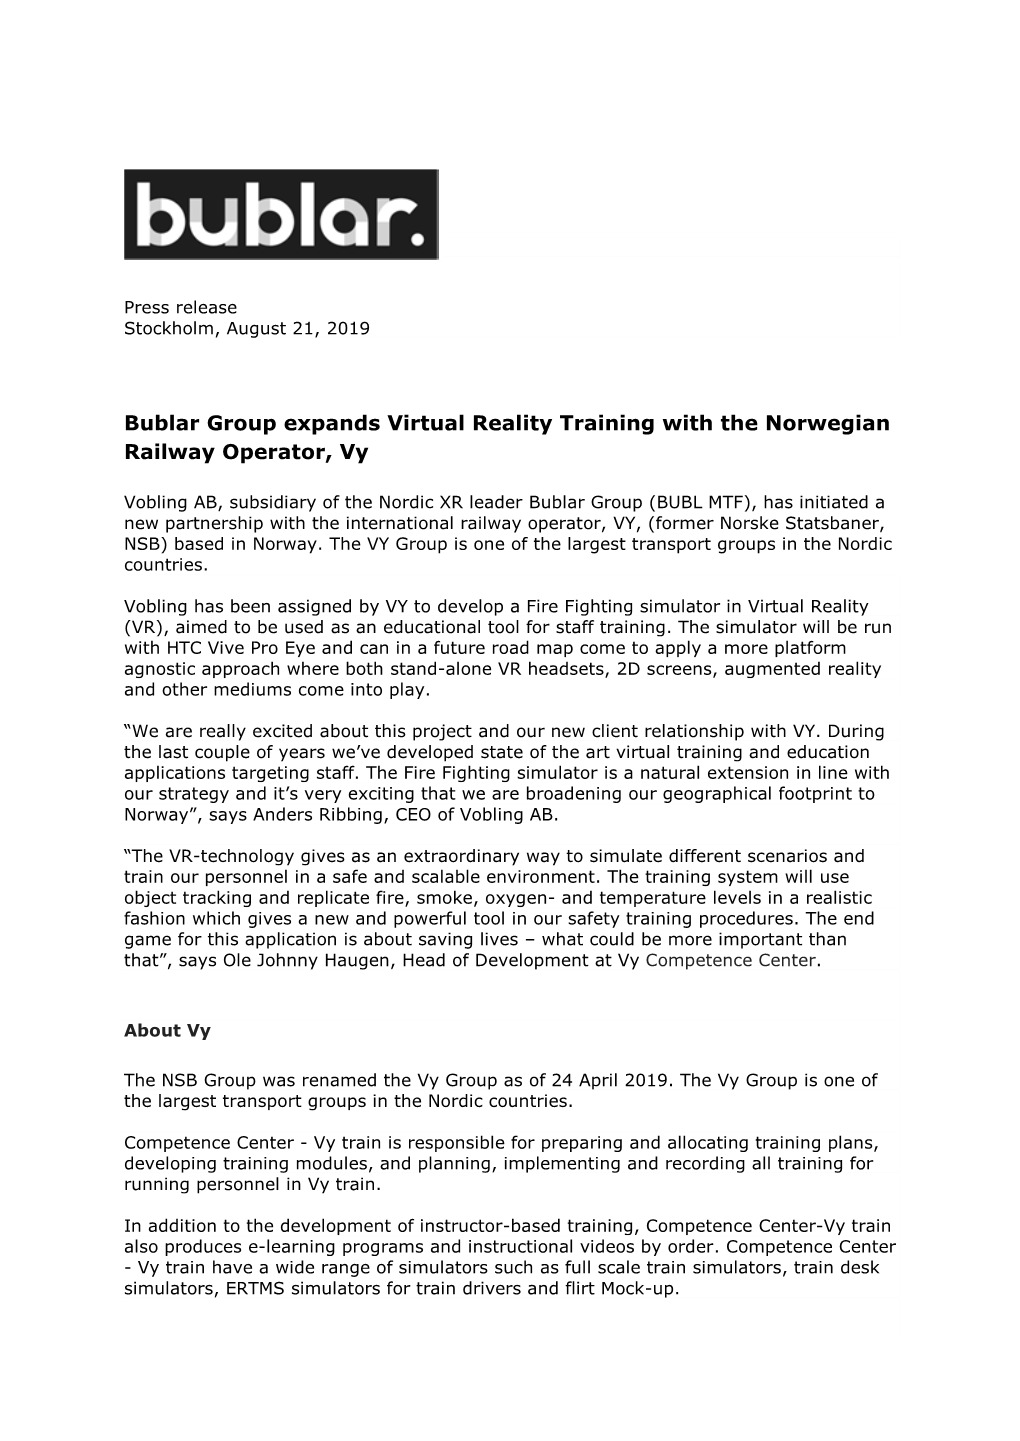 Bublar Group Expands Virtual Reality Training with the Norwegian Railway Operator, Vy